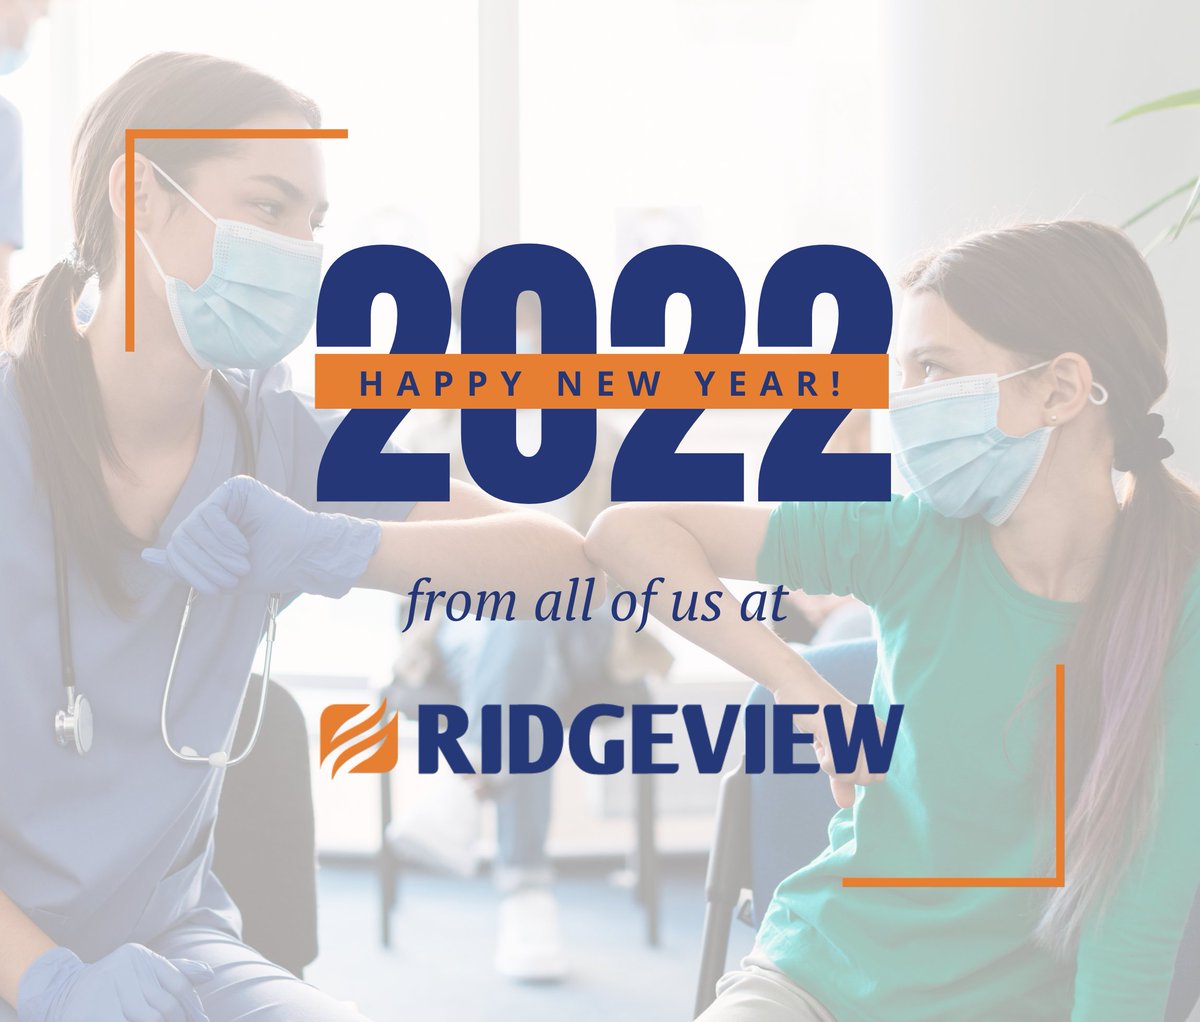 From all of us at Ridgeview, we wish you and your loved ones a healthy, happy 2022! #YouMatterHere